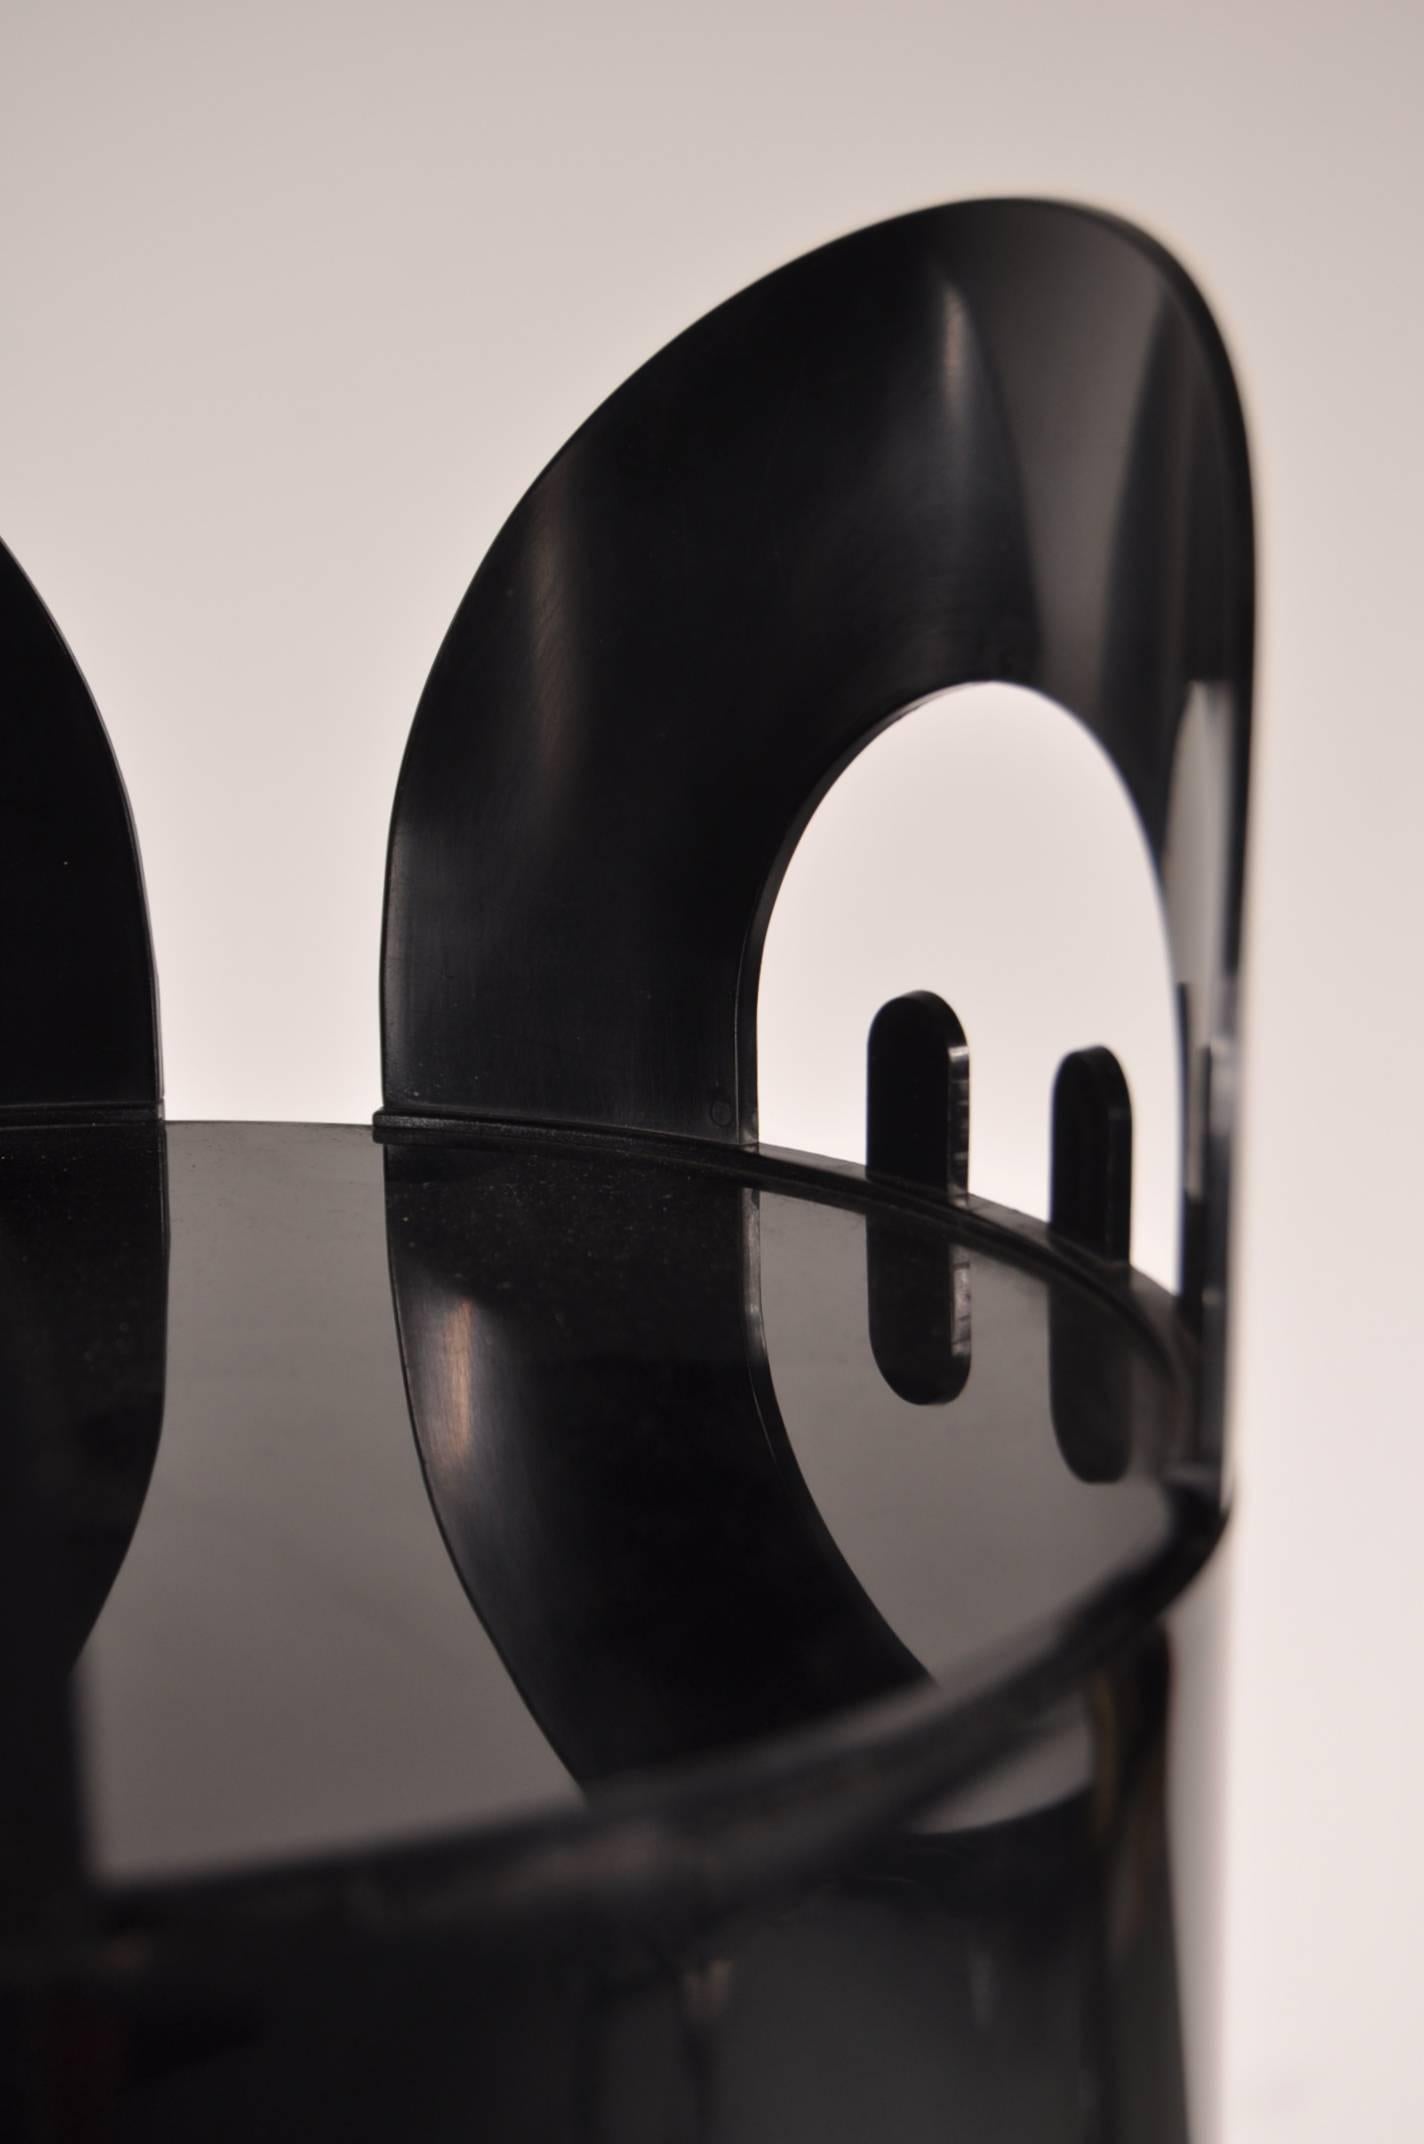 Beautiful coat rack with umbrella stand and storage tray designed by Enzo Mari, manufactured by Danese, Italy in 1968.

This original piece is completely made of black plastic with a strong concrete base, providing extra stability. It is uniquely